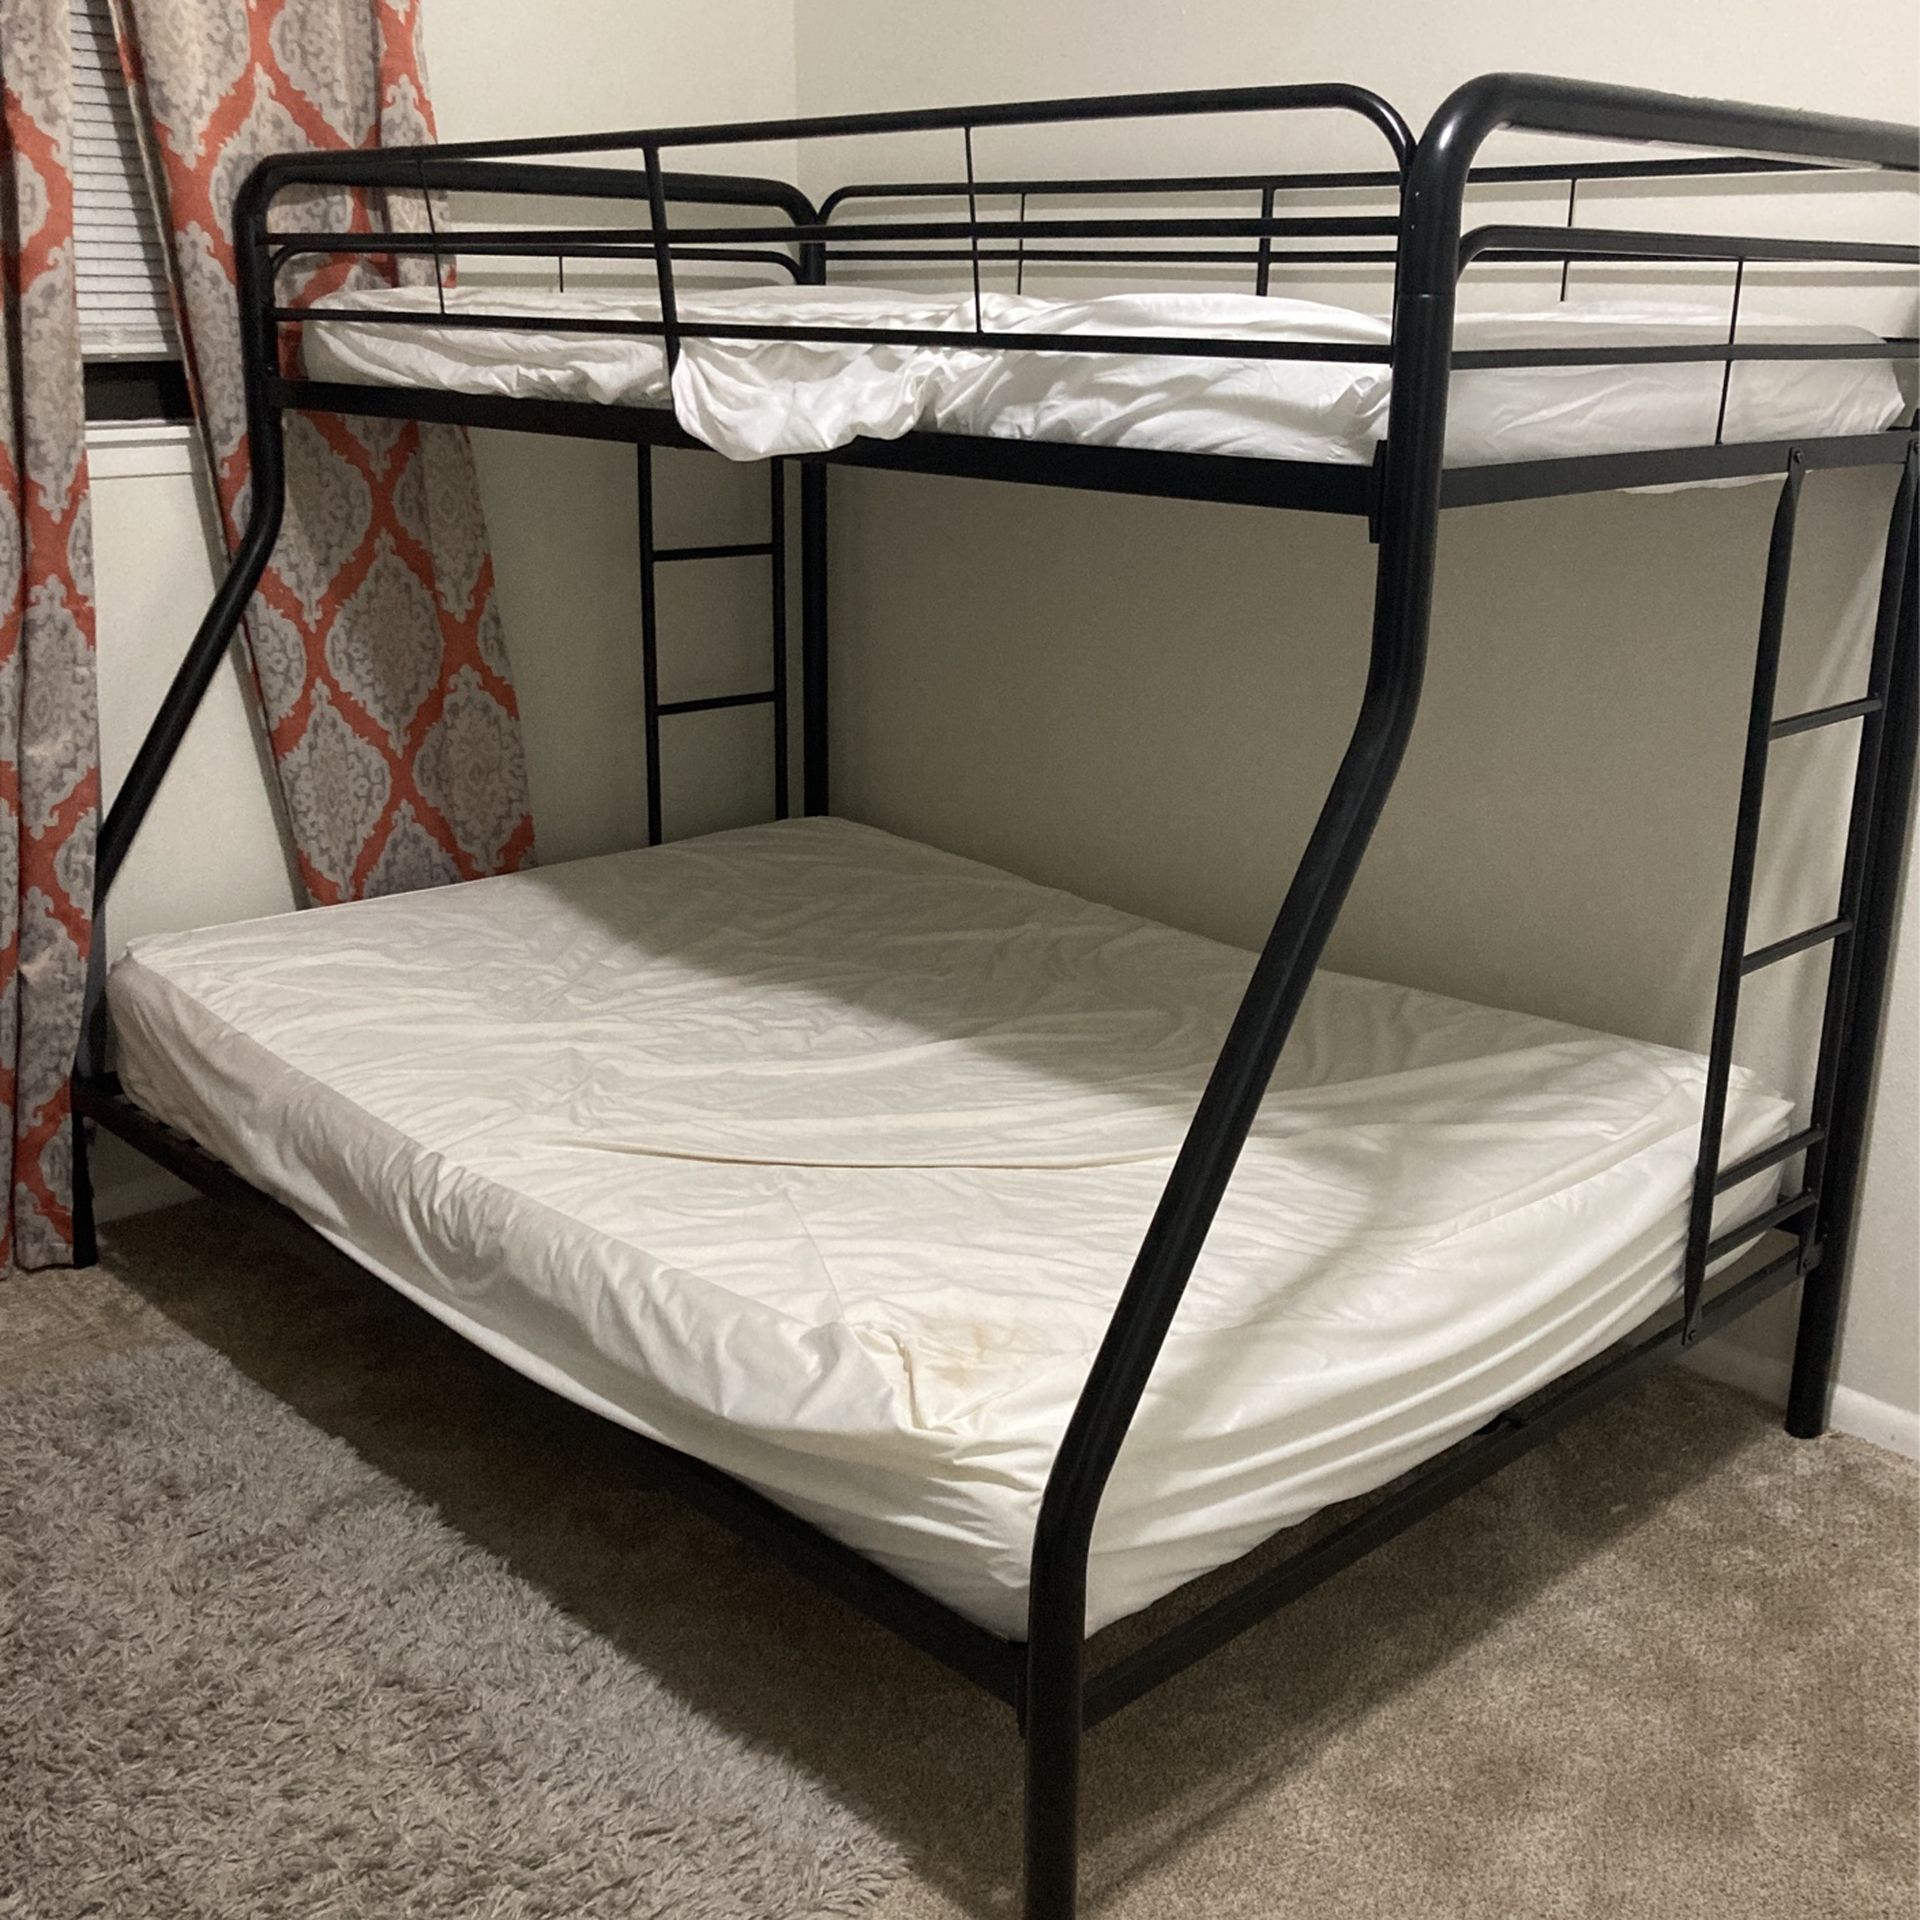 Full Twin Bunk Bed